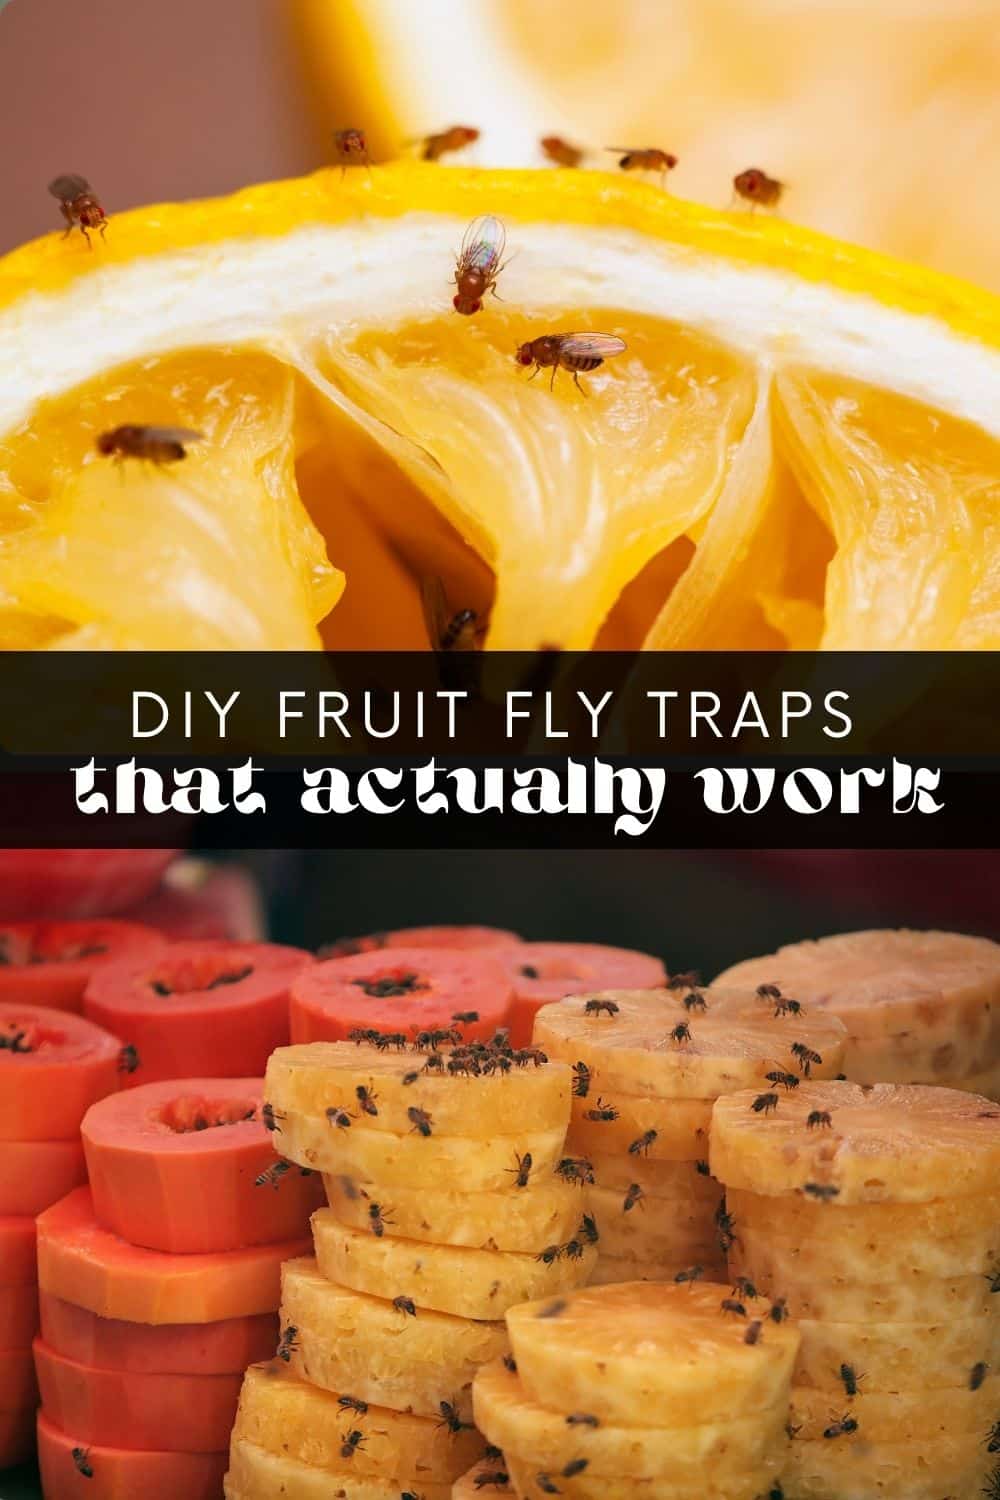 No one wants fruit flies buzzing around their kitchen! Follow my step-by-step guide and learn how to trap fruit flies using 3 basic household items. These fruit fly traps are super easy to make and are highly effective!